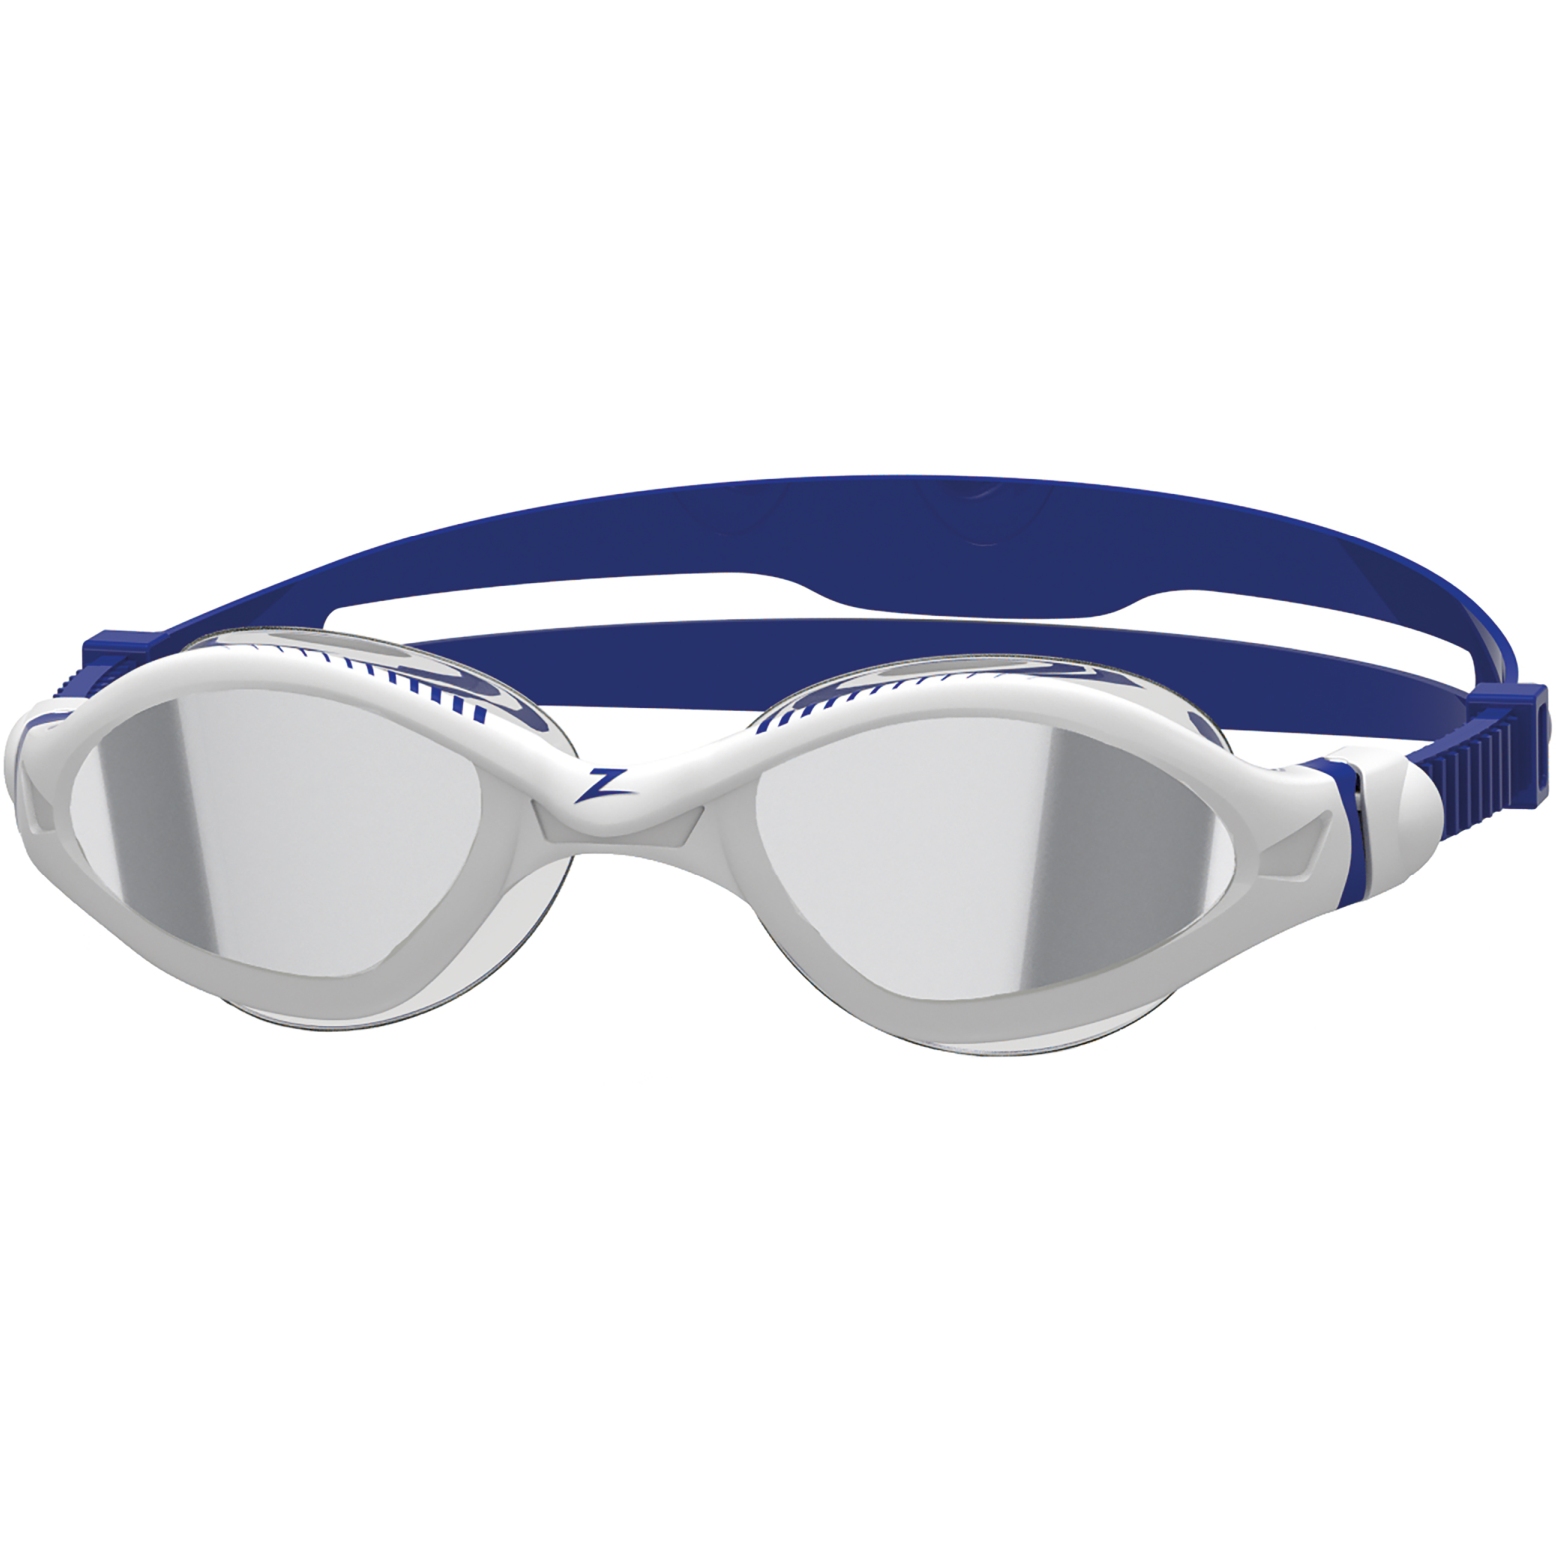 Image of Zoggs Tiger LSR+ Swim Goggles - Blue/Blue/Reef Clear